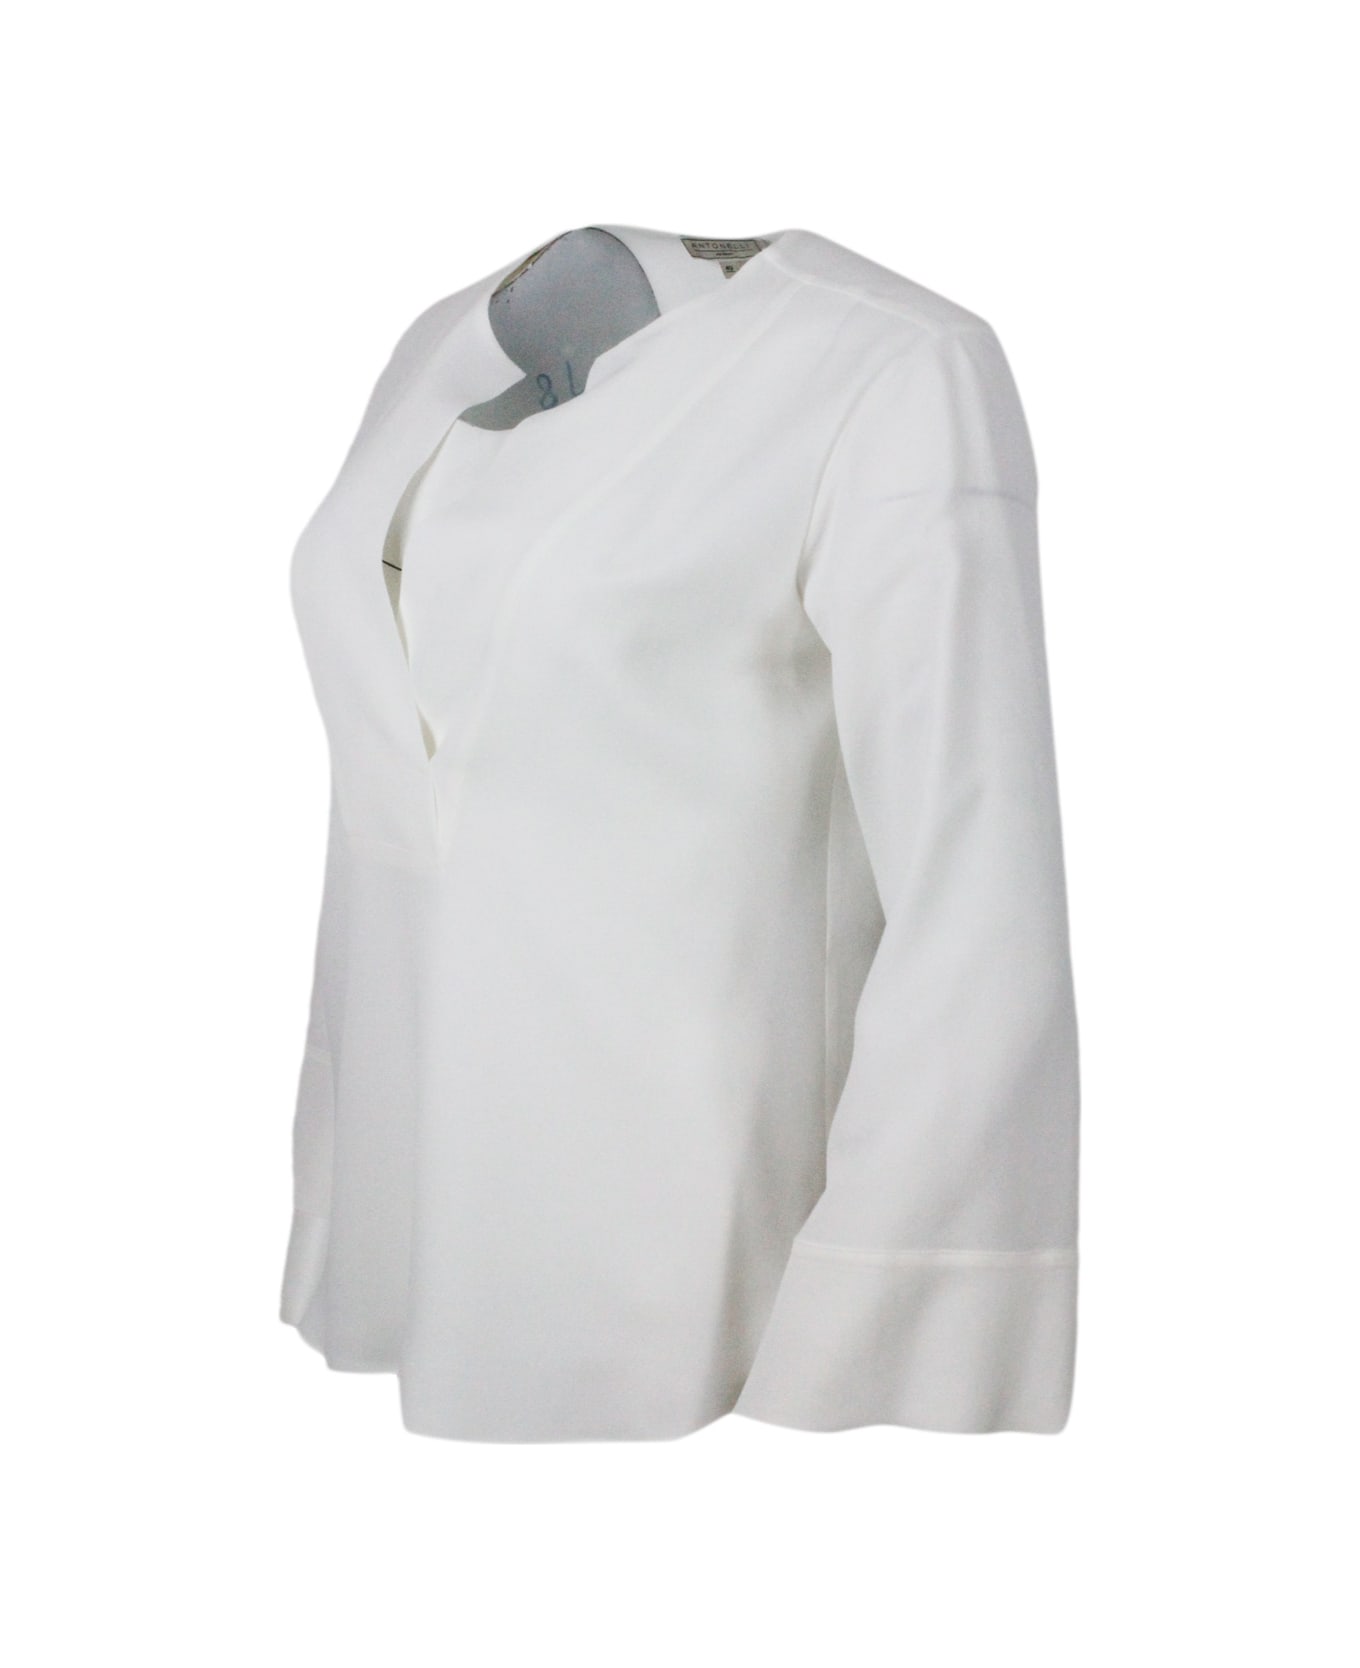 Antonelli Lightweight Shirt In Stretch Silk Crepes With V-neck. Fluid Fit - cream